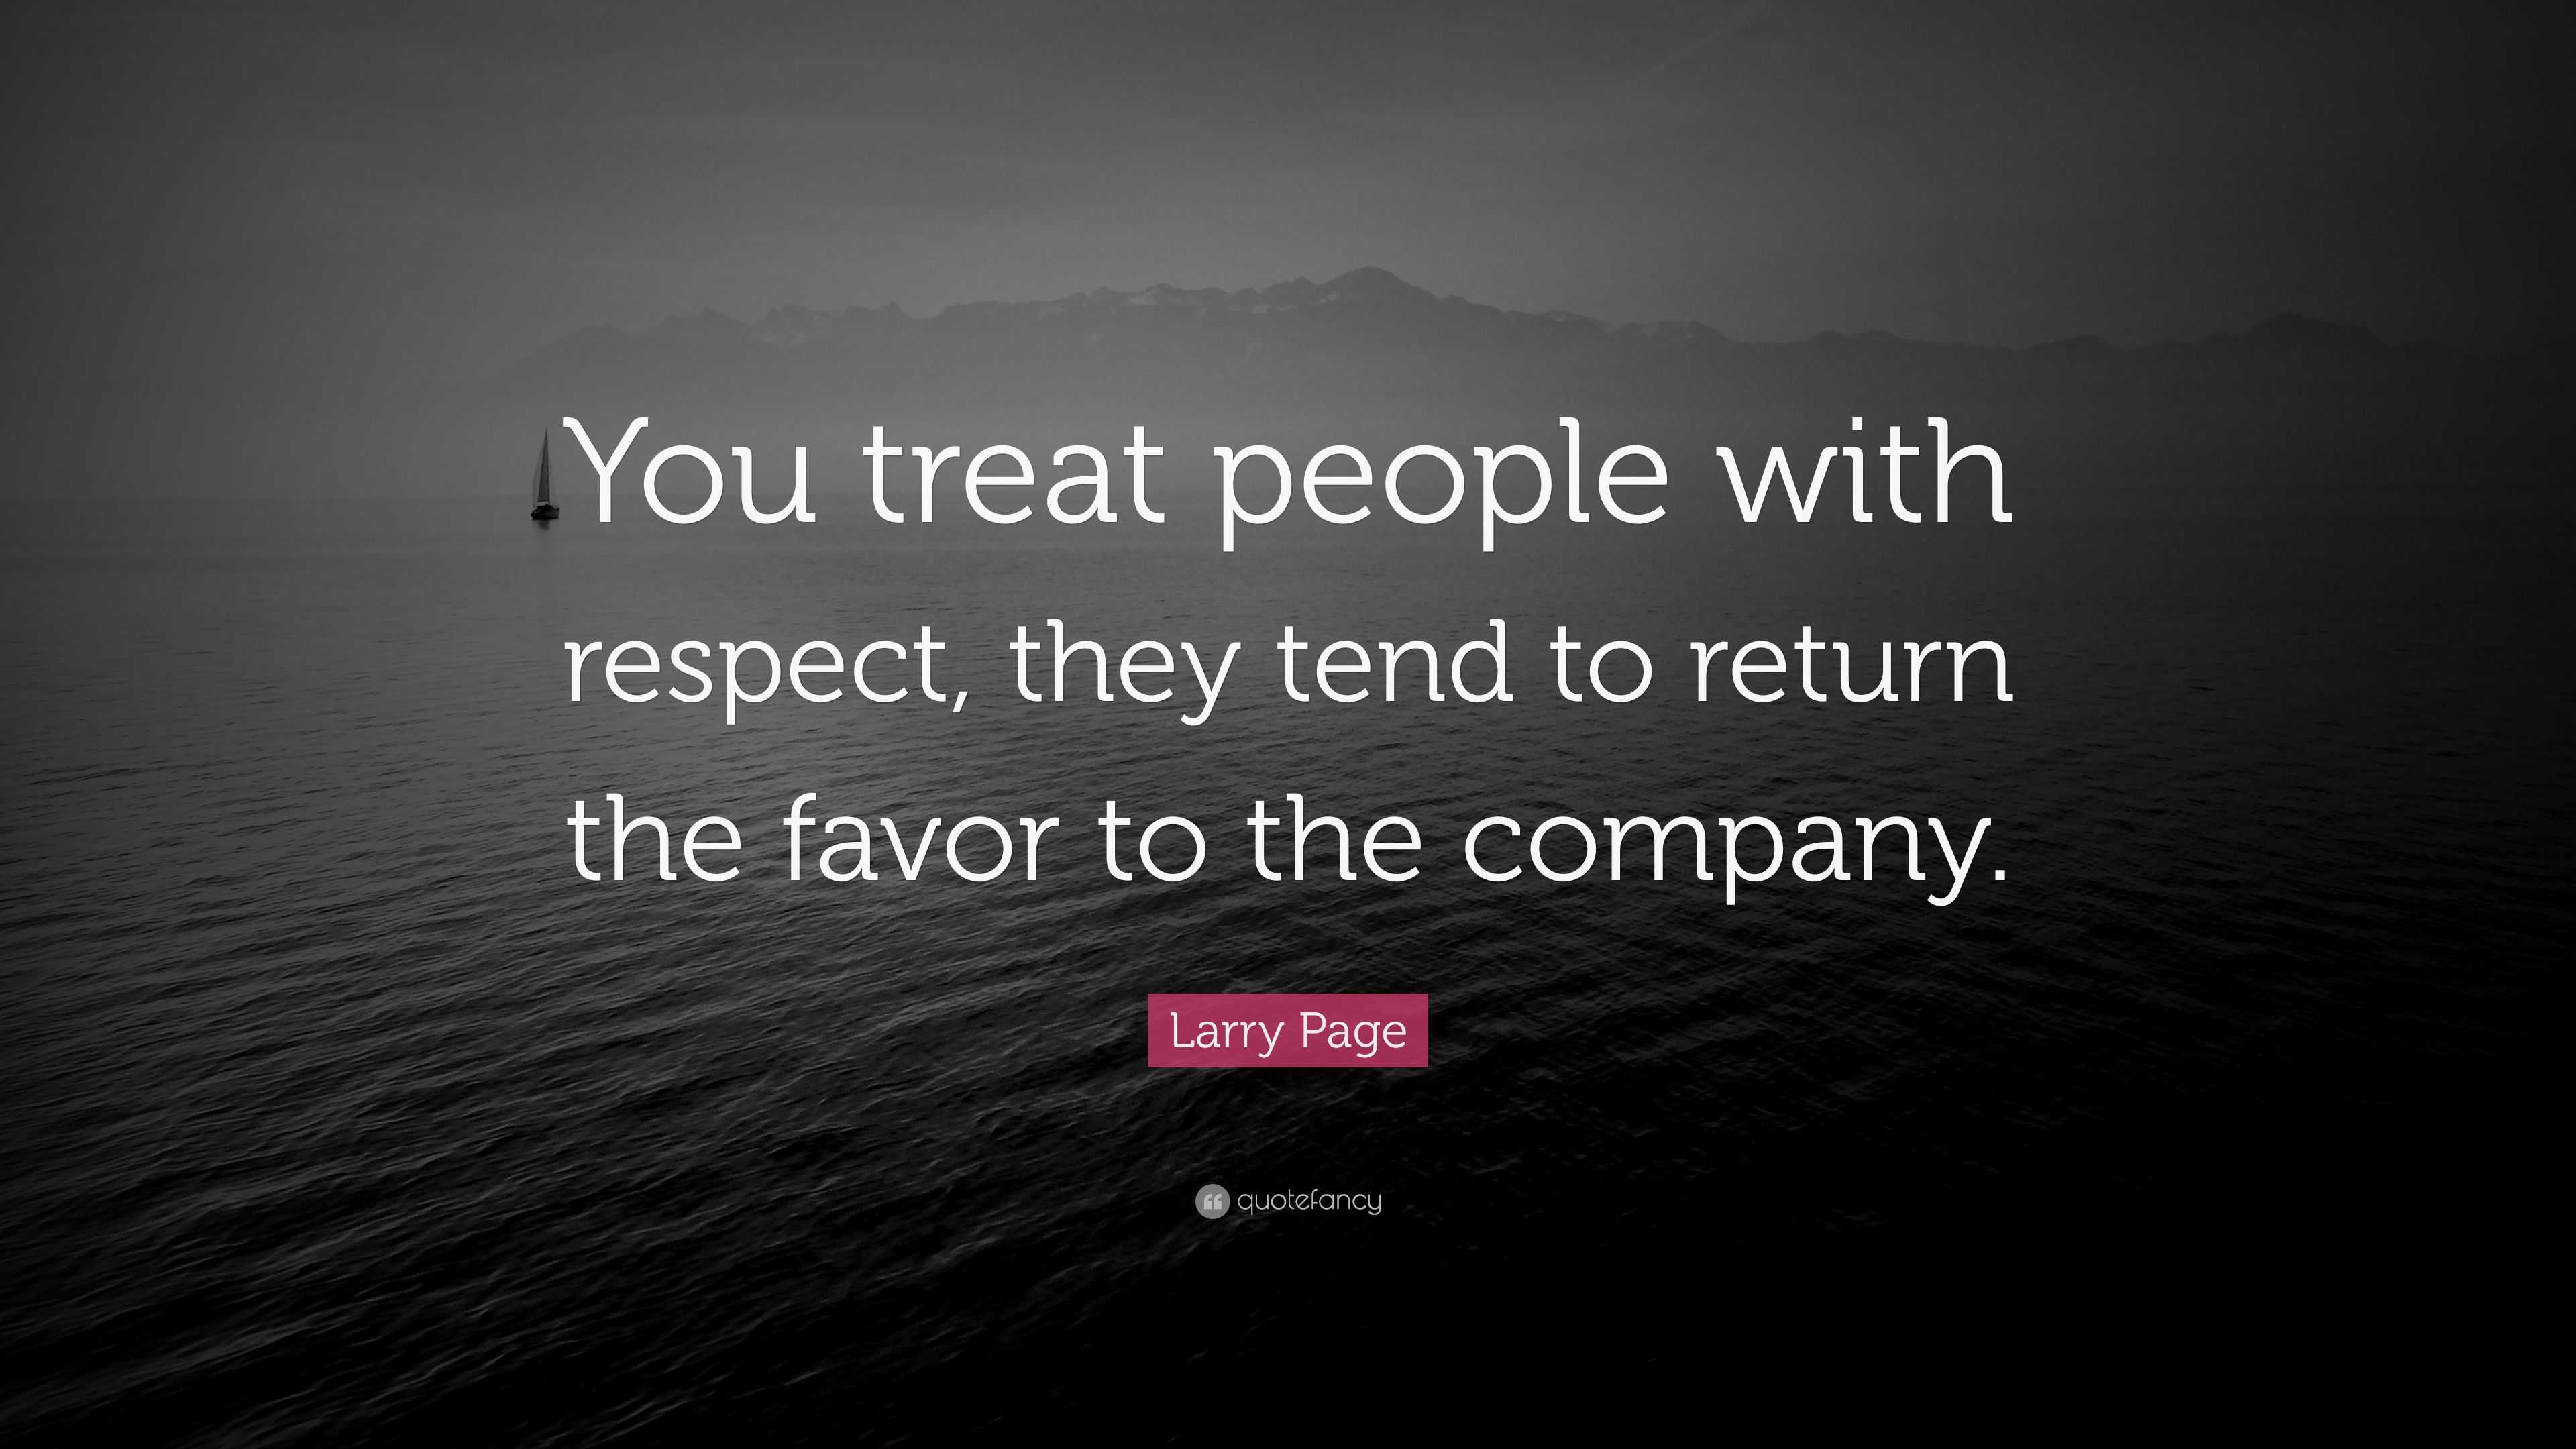 Larry Page Quote: "You treat people with respect, they tend 